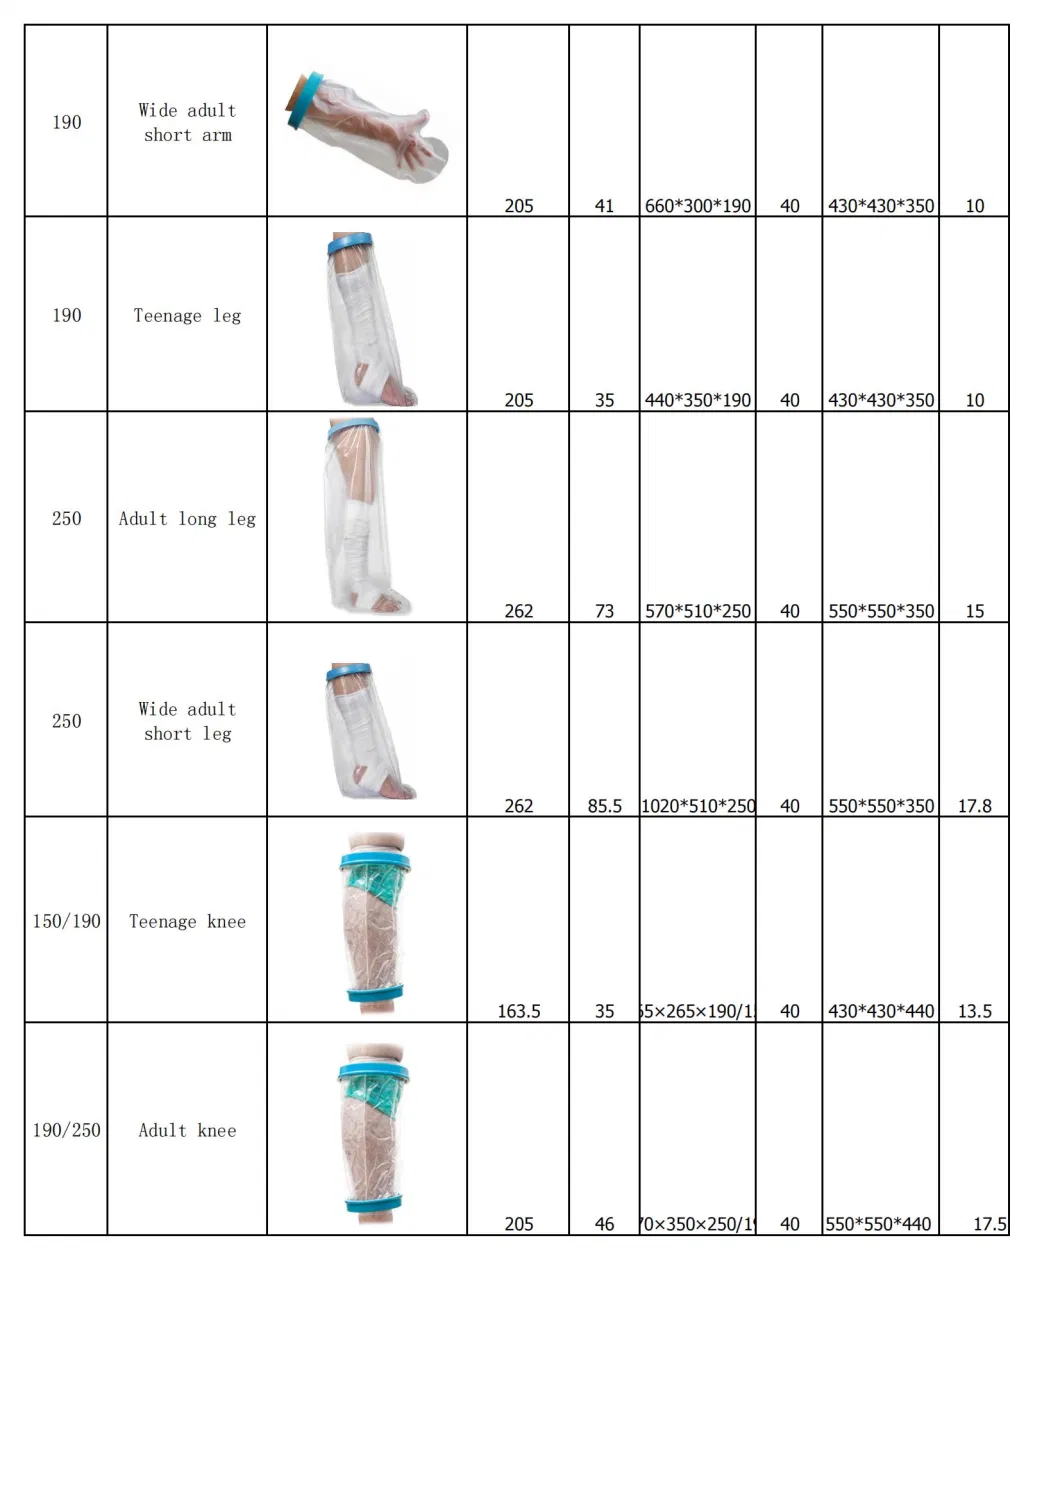 Waterproof Cast and Bandage Protector for Use Whilst Showering (Adult Short Arm)